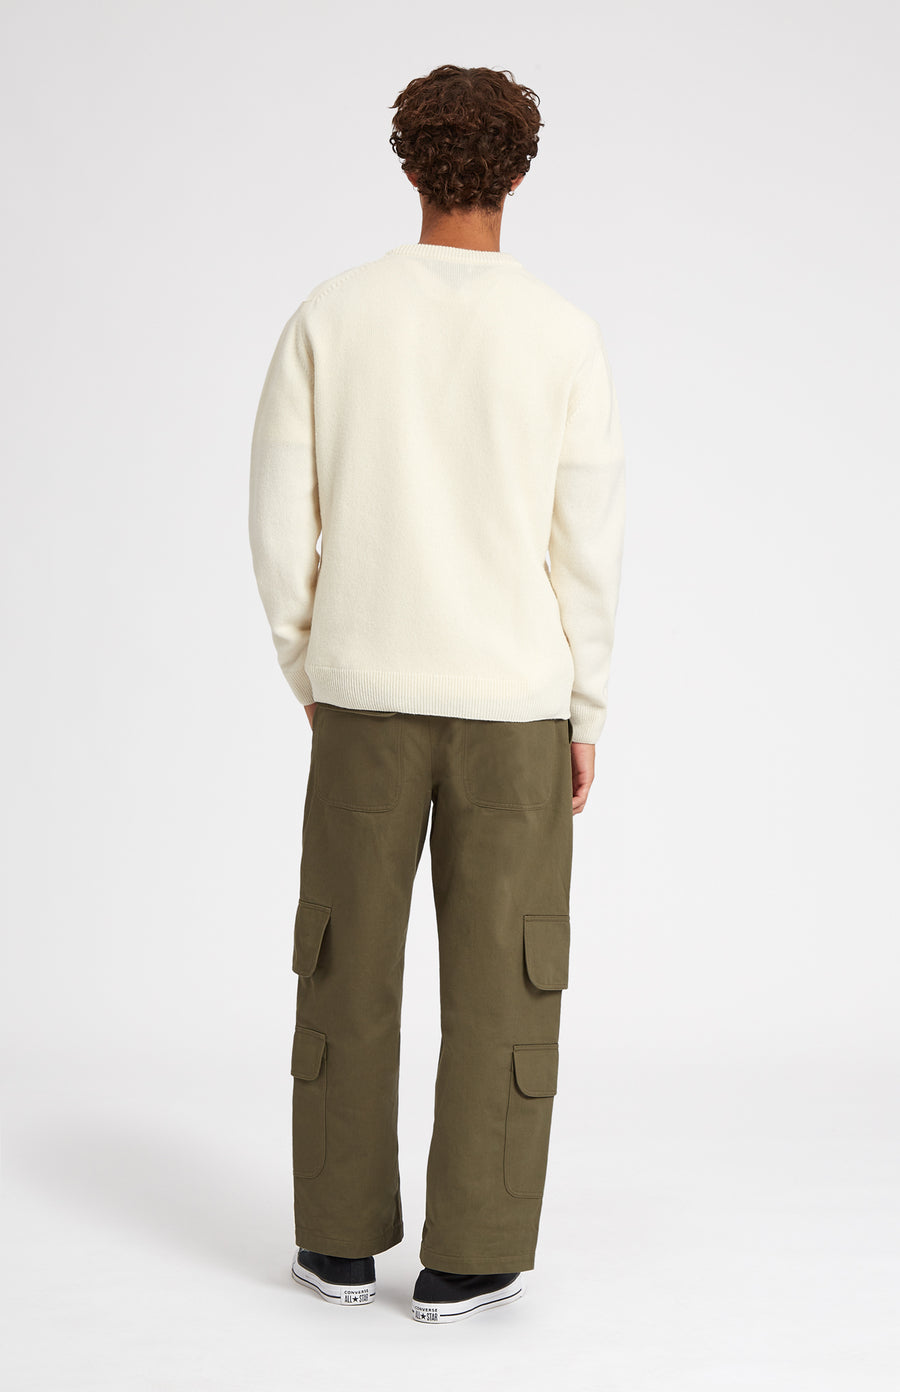 Round Neck Lambswool Blend Golf Jumper In Ivory rear view - Pringle of Scotland